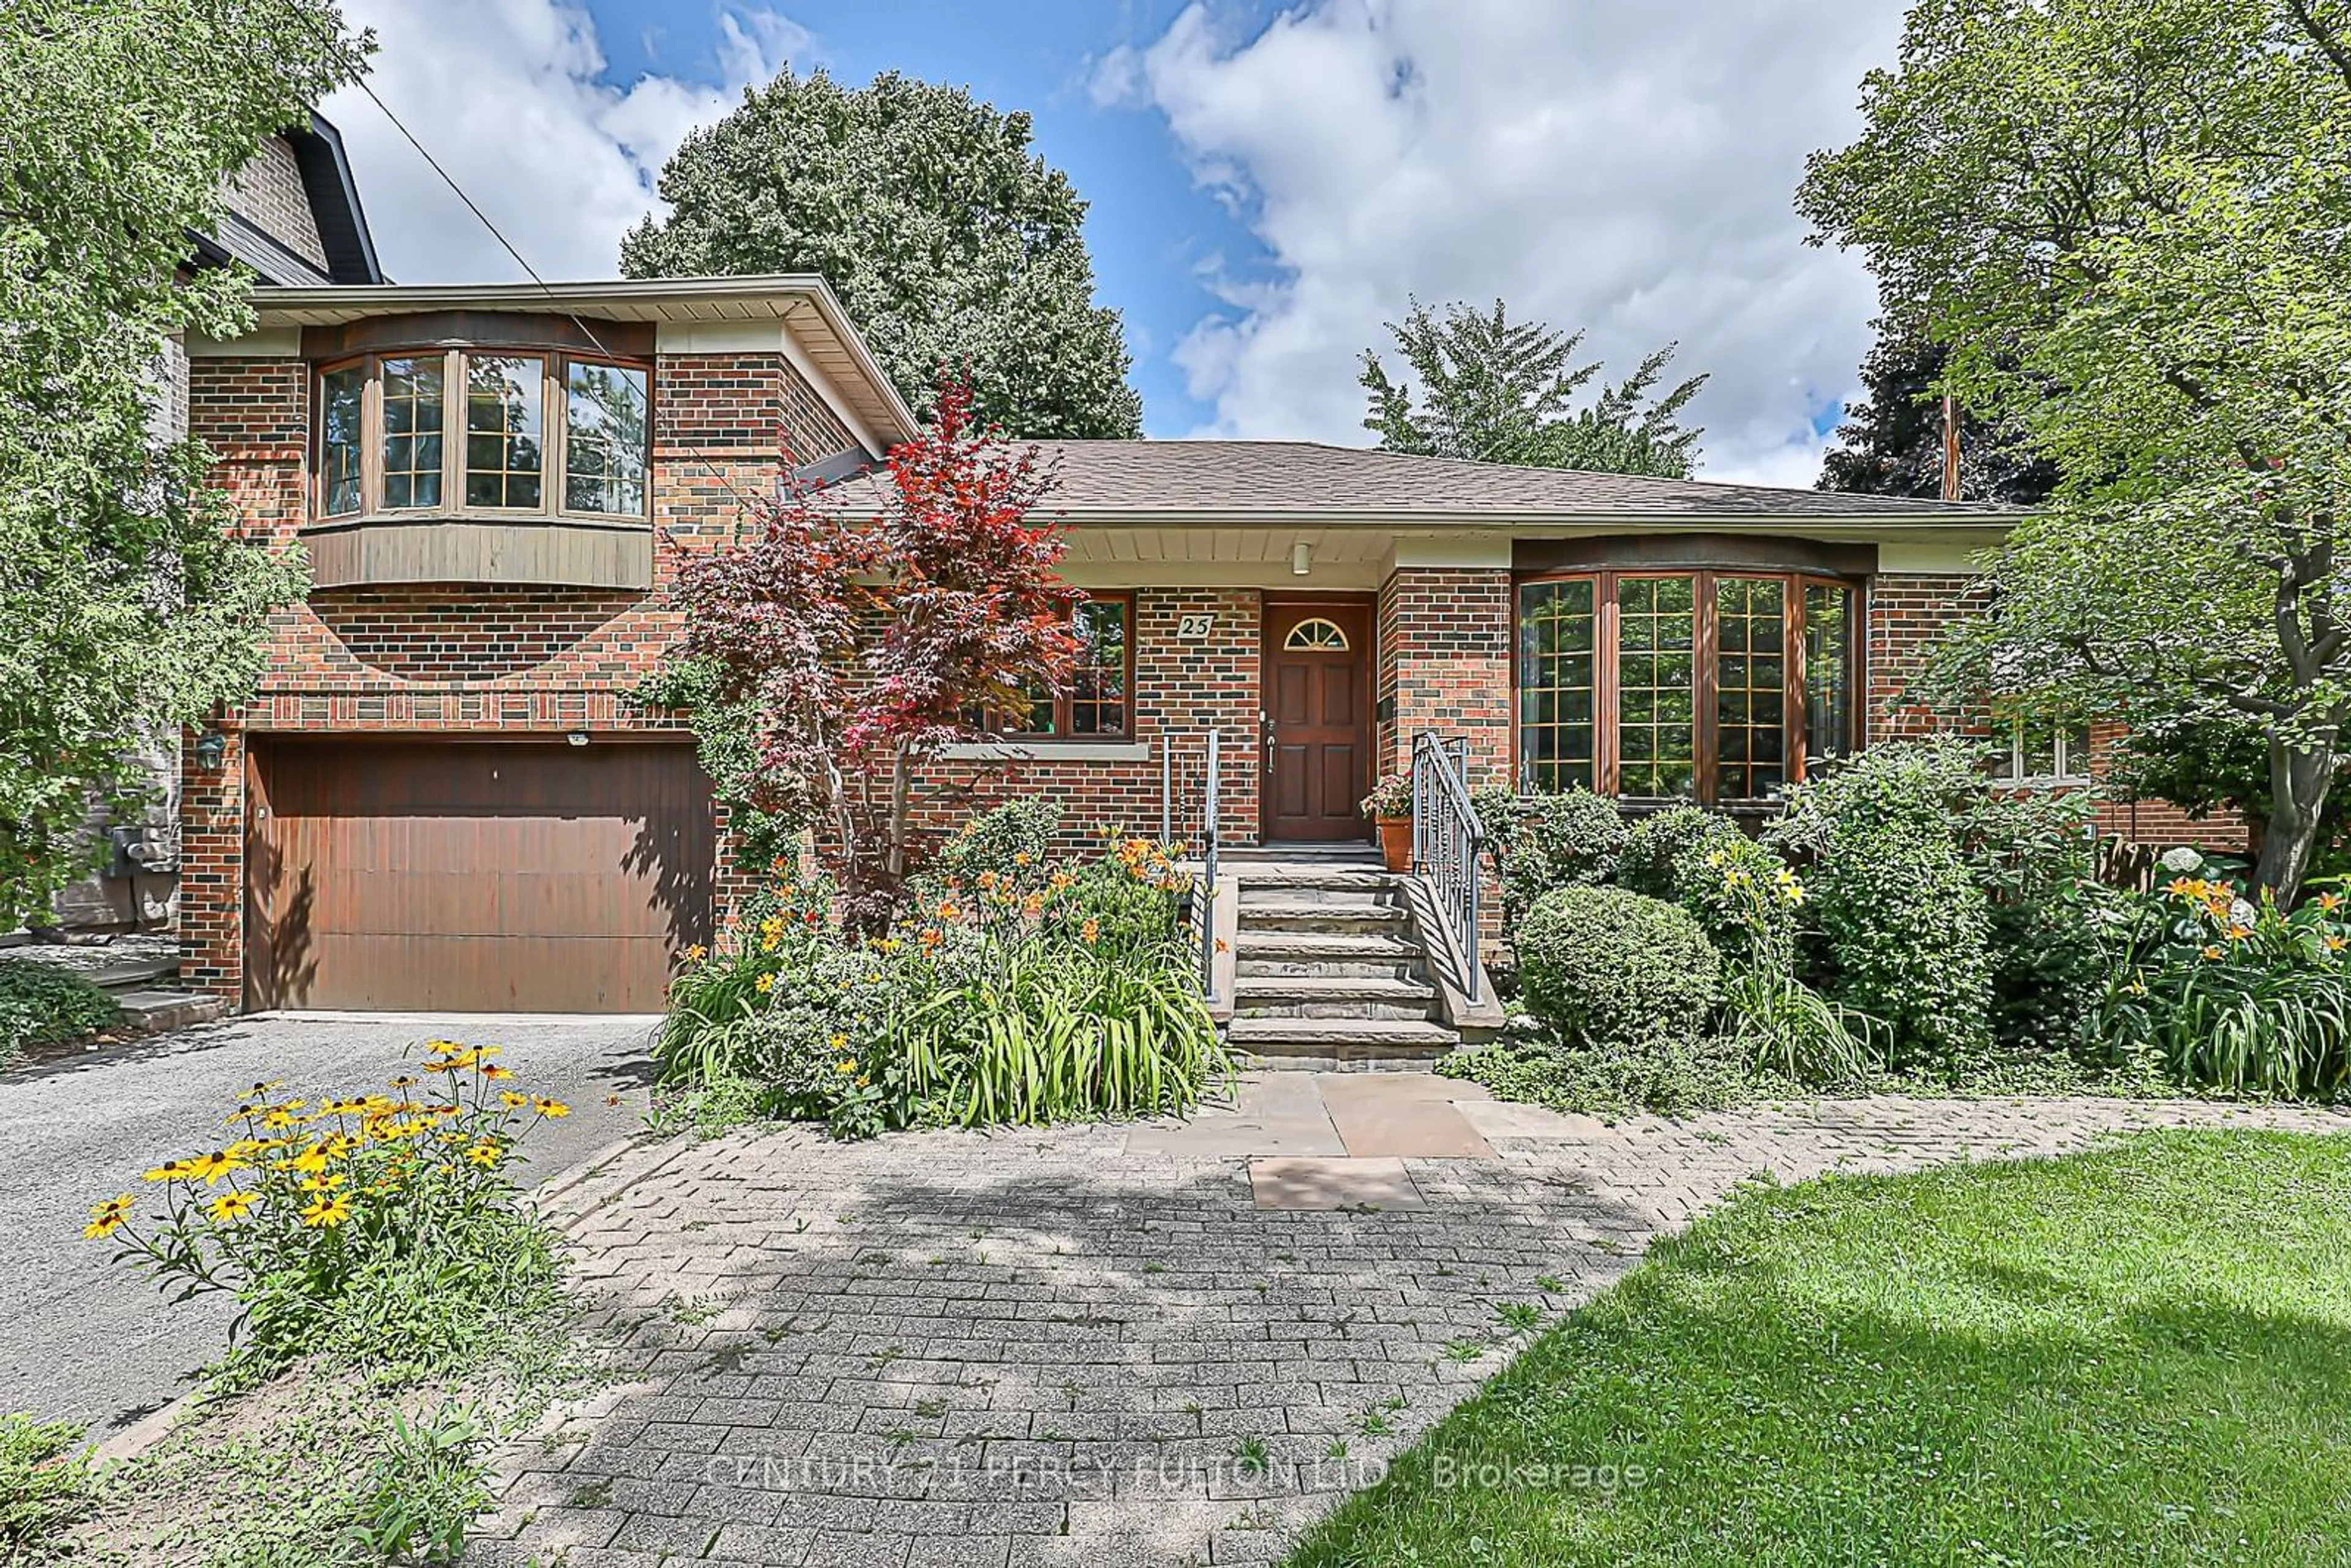 Home with brick exterior material for 25 Ambrose Rd, Toronto Ontario M2K 1S2